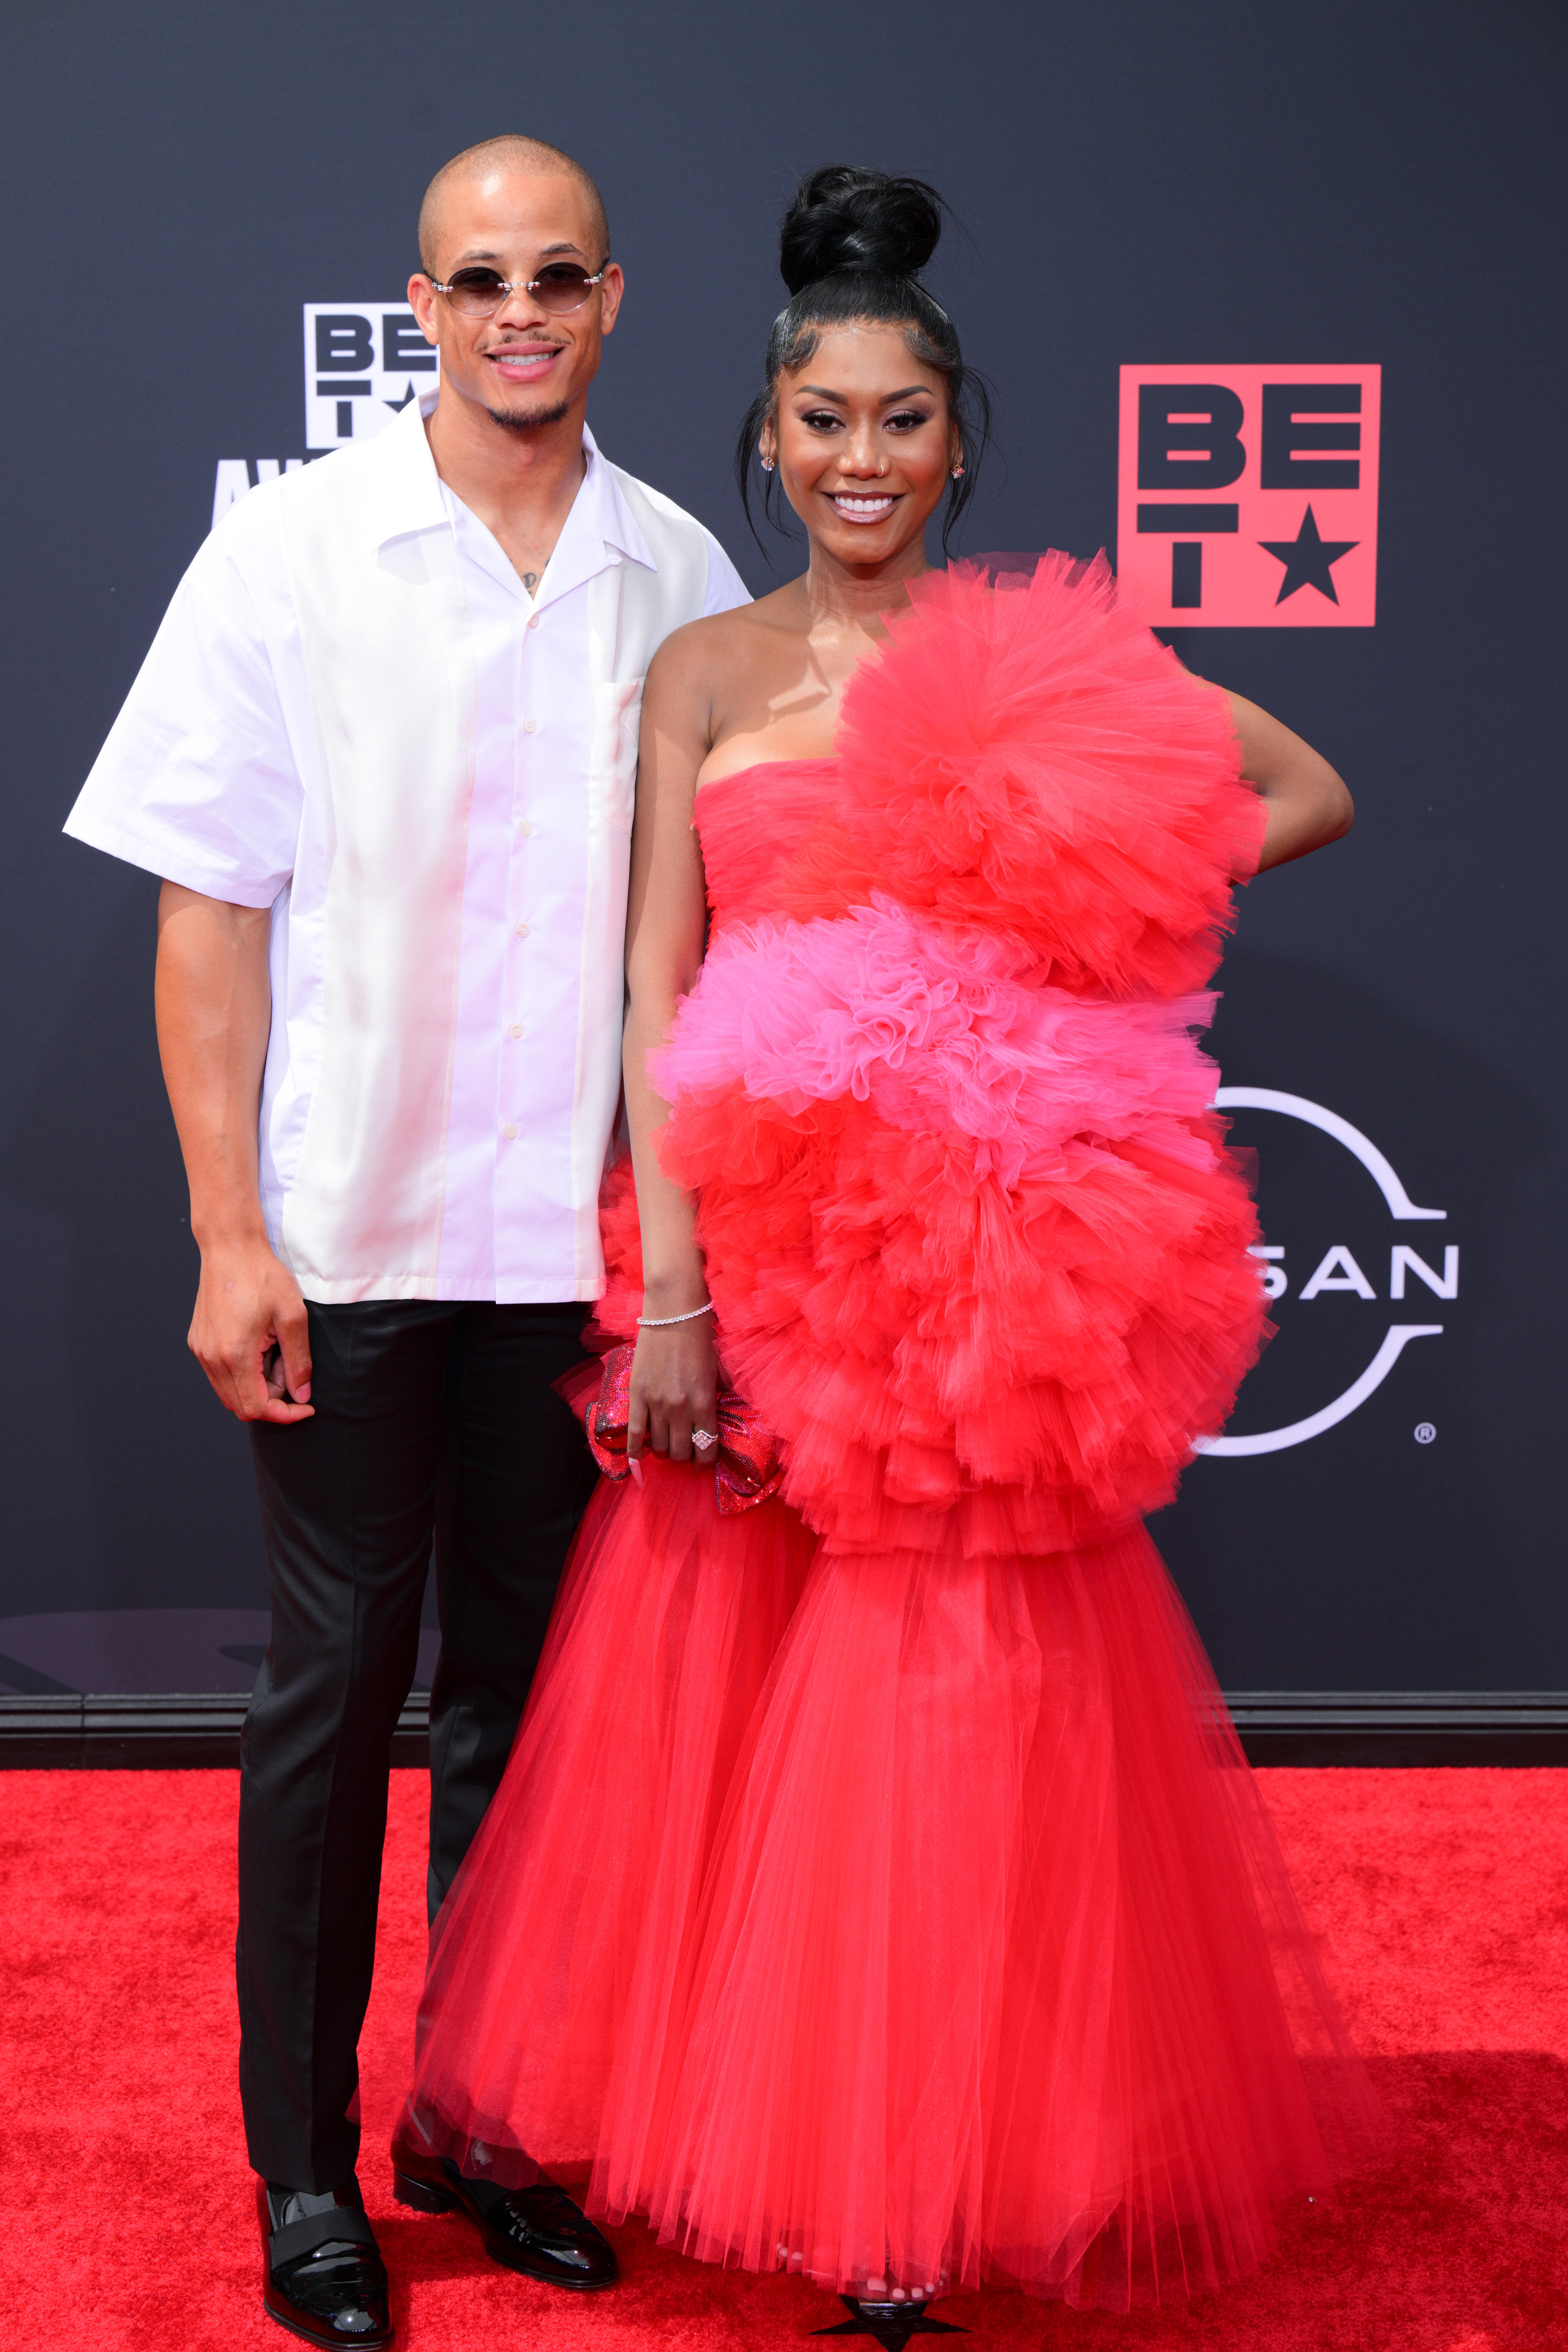 Raysean Hairston and Muni Long on the BET Awards red carpet at the Microsoft Theater in Los Angeles, California, on June 26, 2022. | Source: Getty Images